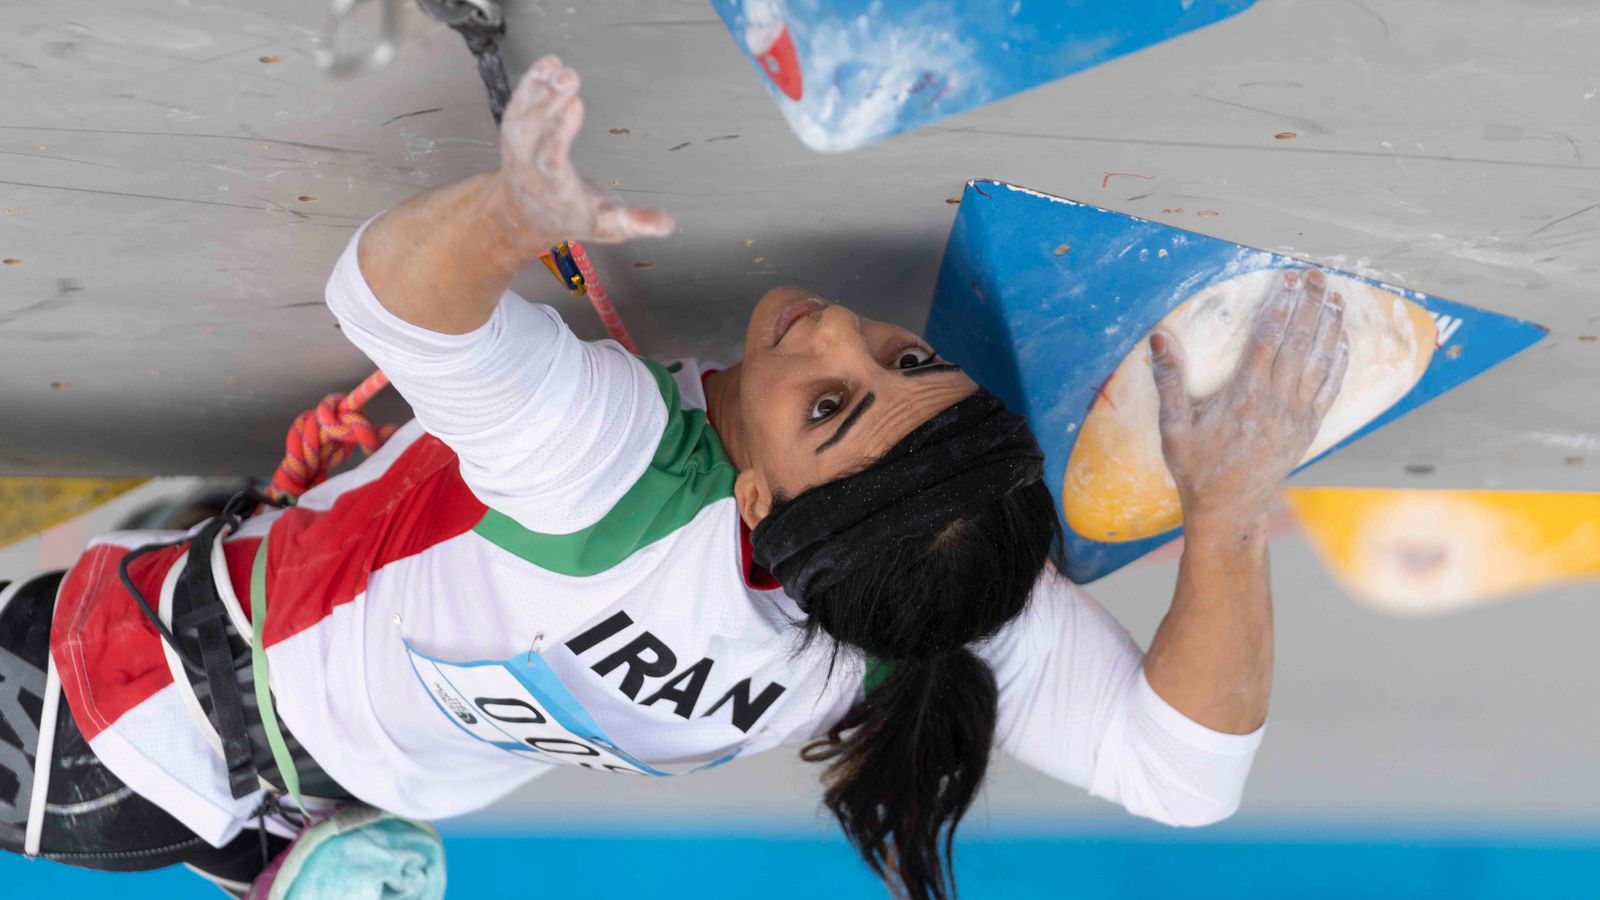 elnaz-rekabi-fears-grow-for-iranian-athlete-who-competed-without-hijab-at-international-event